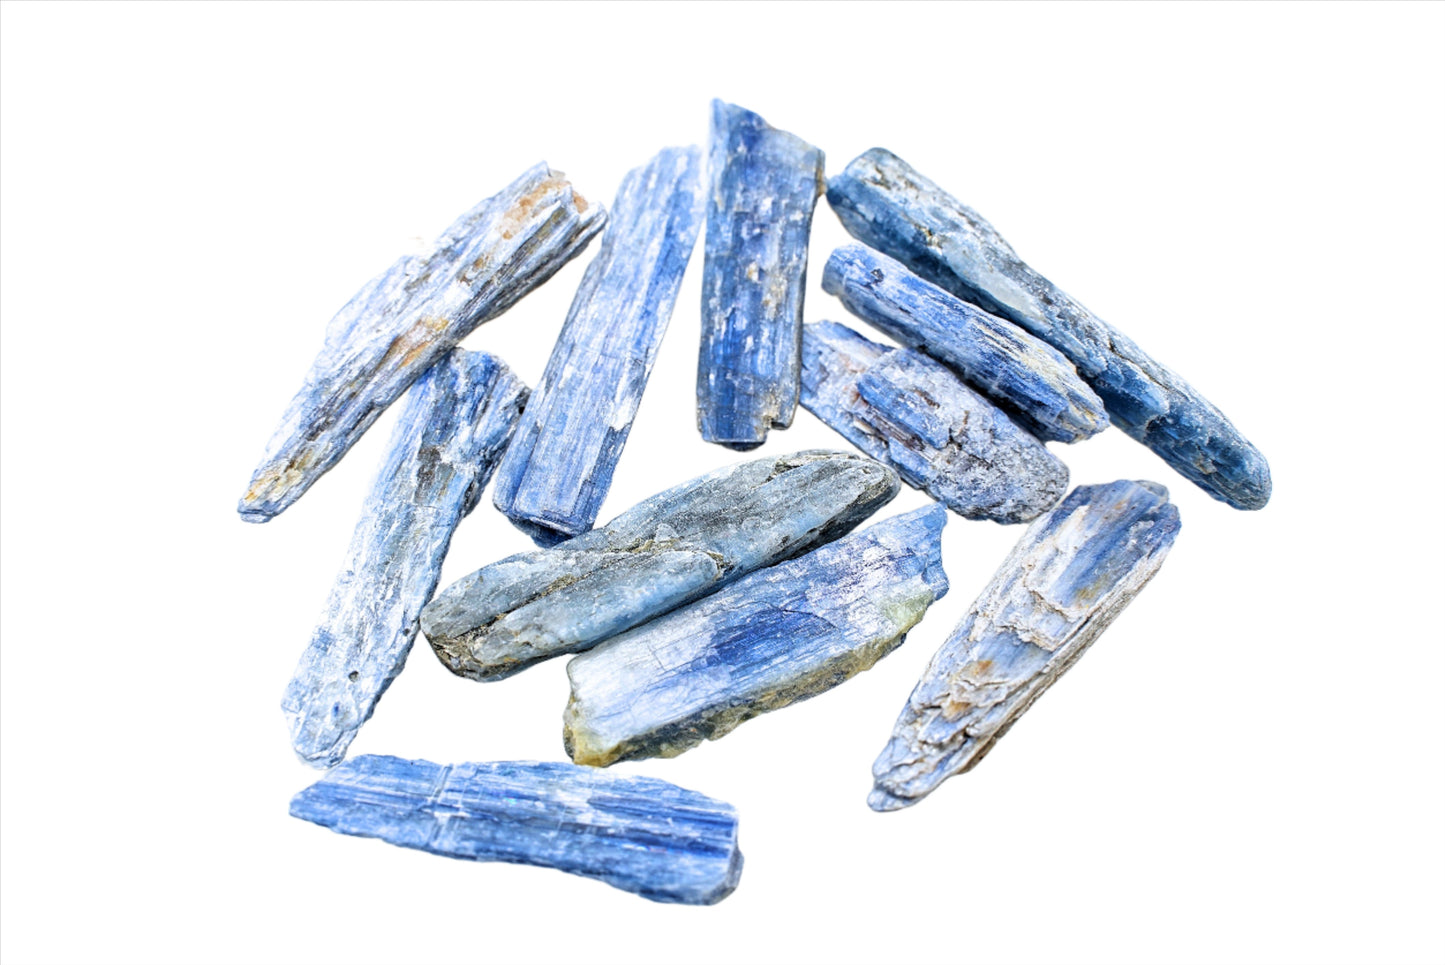 Natural, Hand-Selected Blue Kyanite Rough Stone Individual Pieces